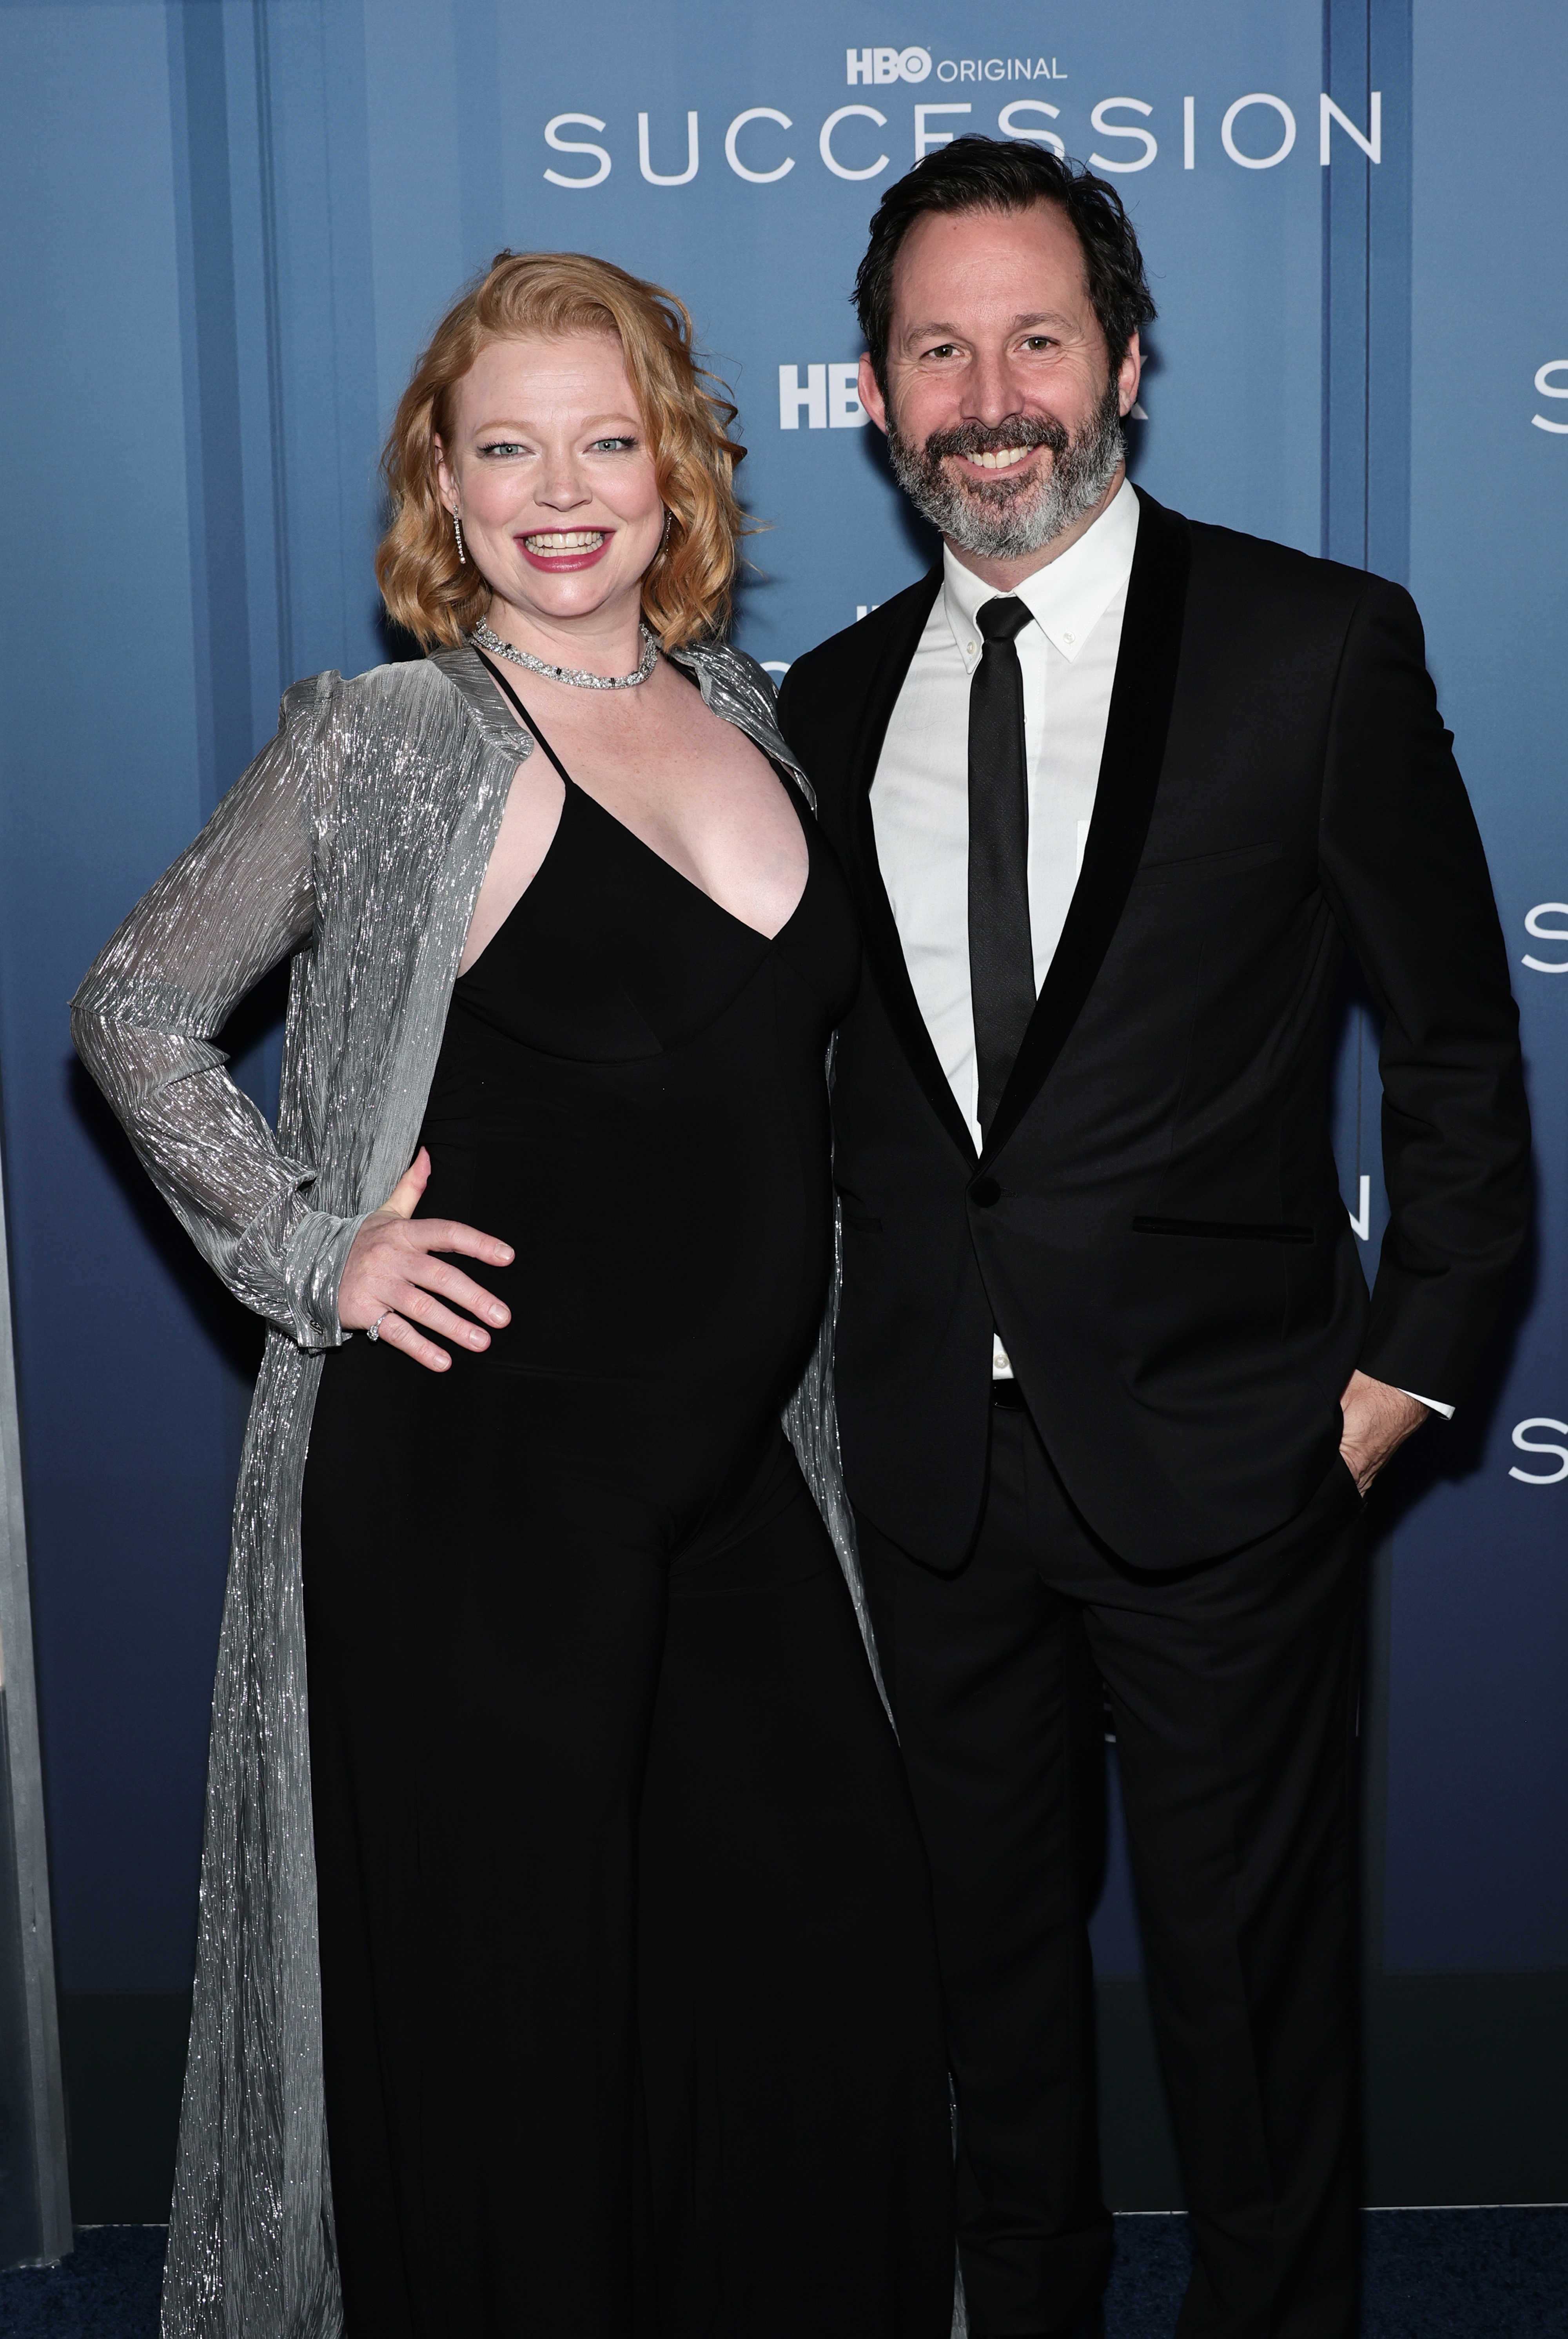 Sarah Snook and Dave Lawson at the Season 4 premiere of Succession